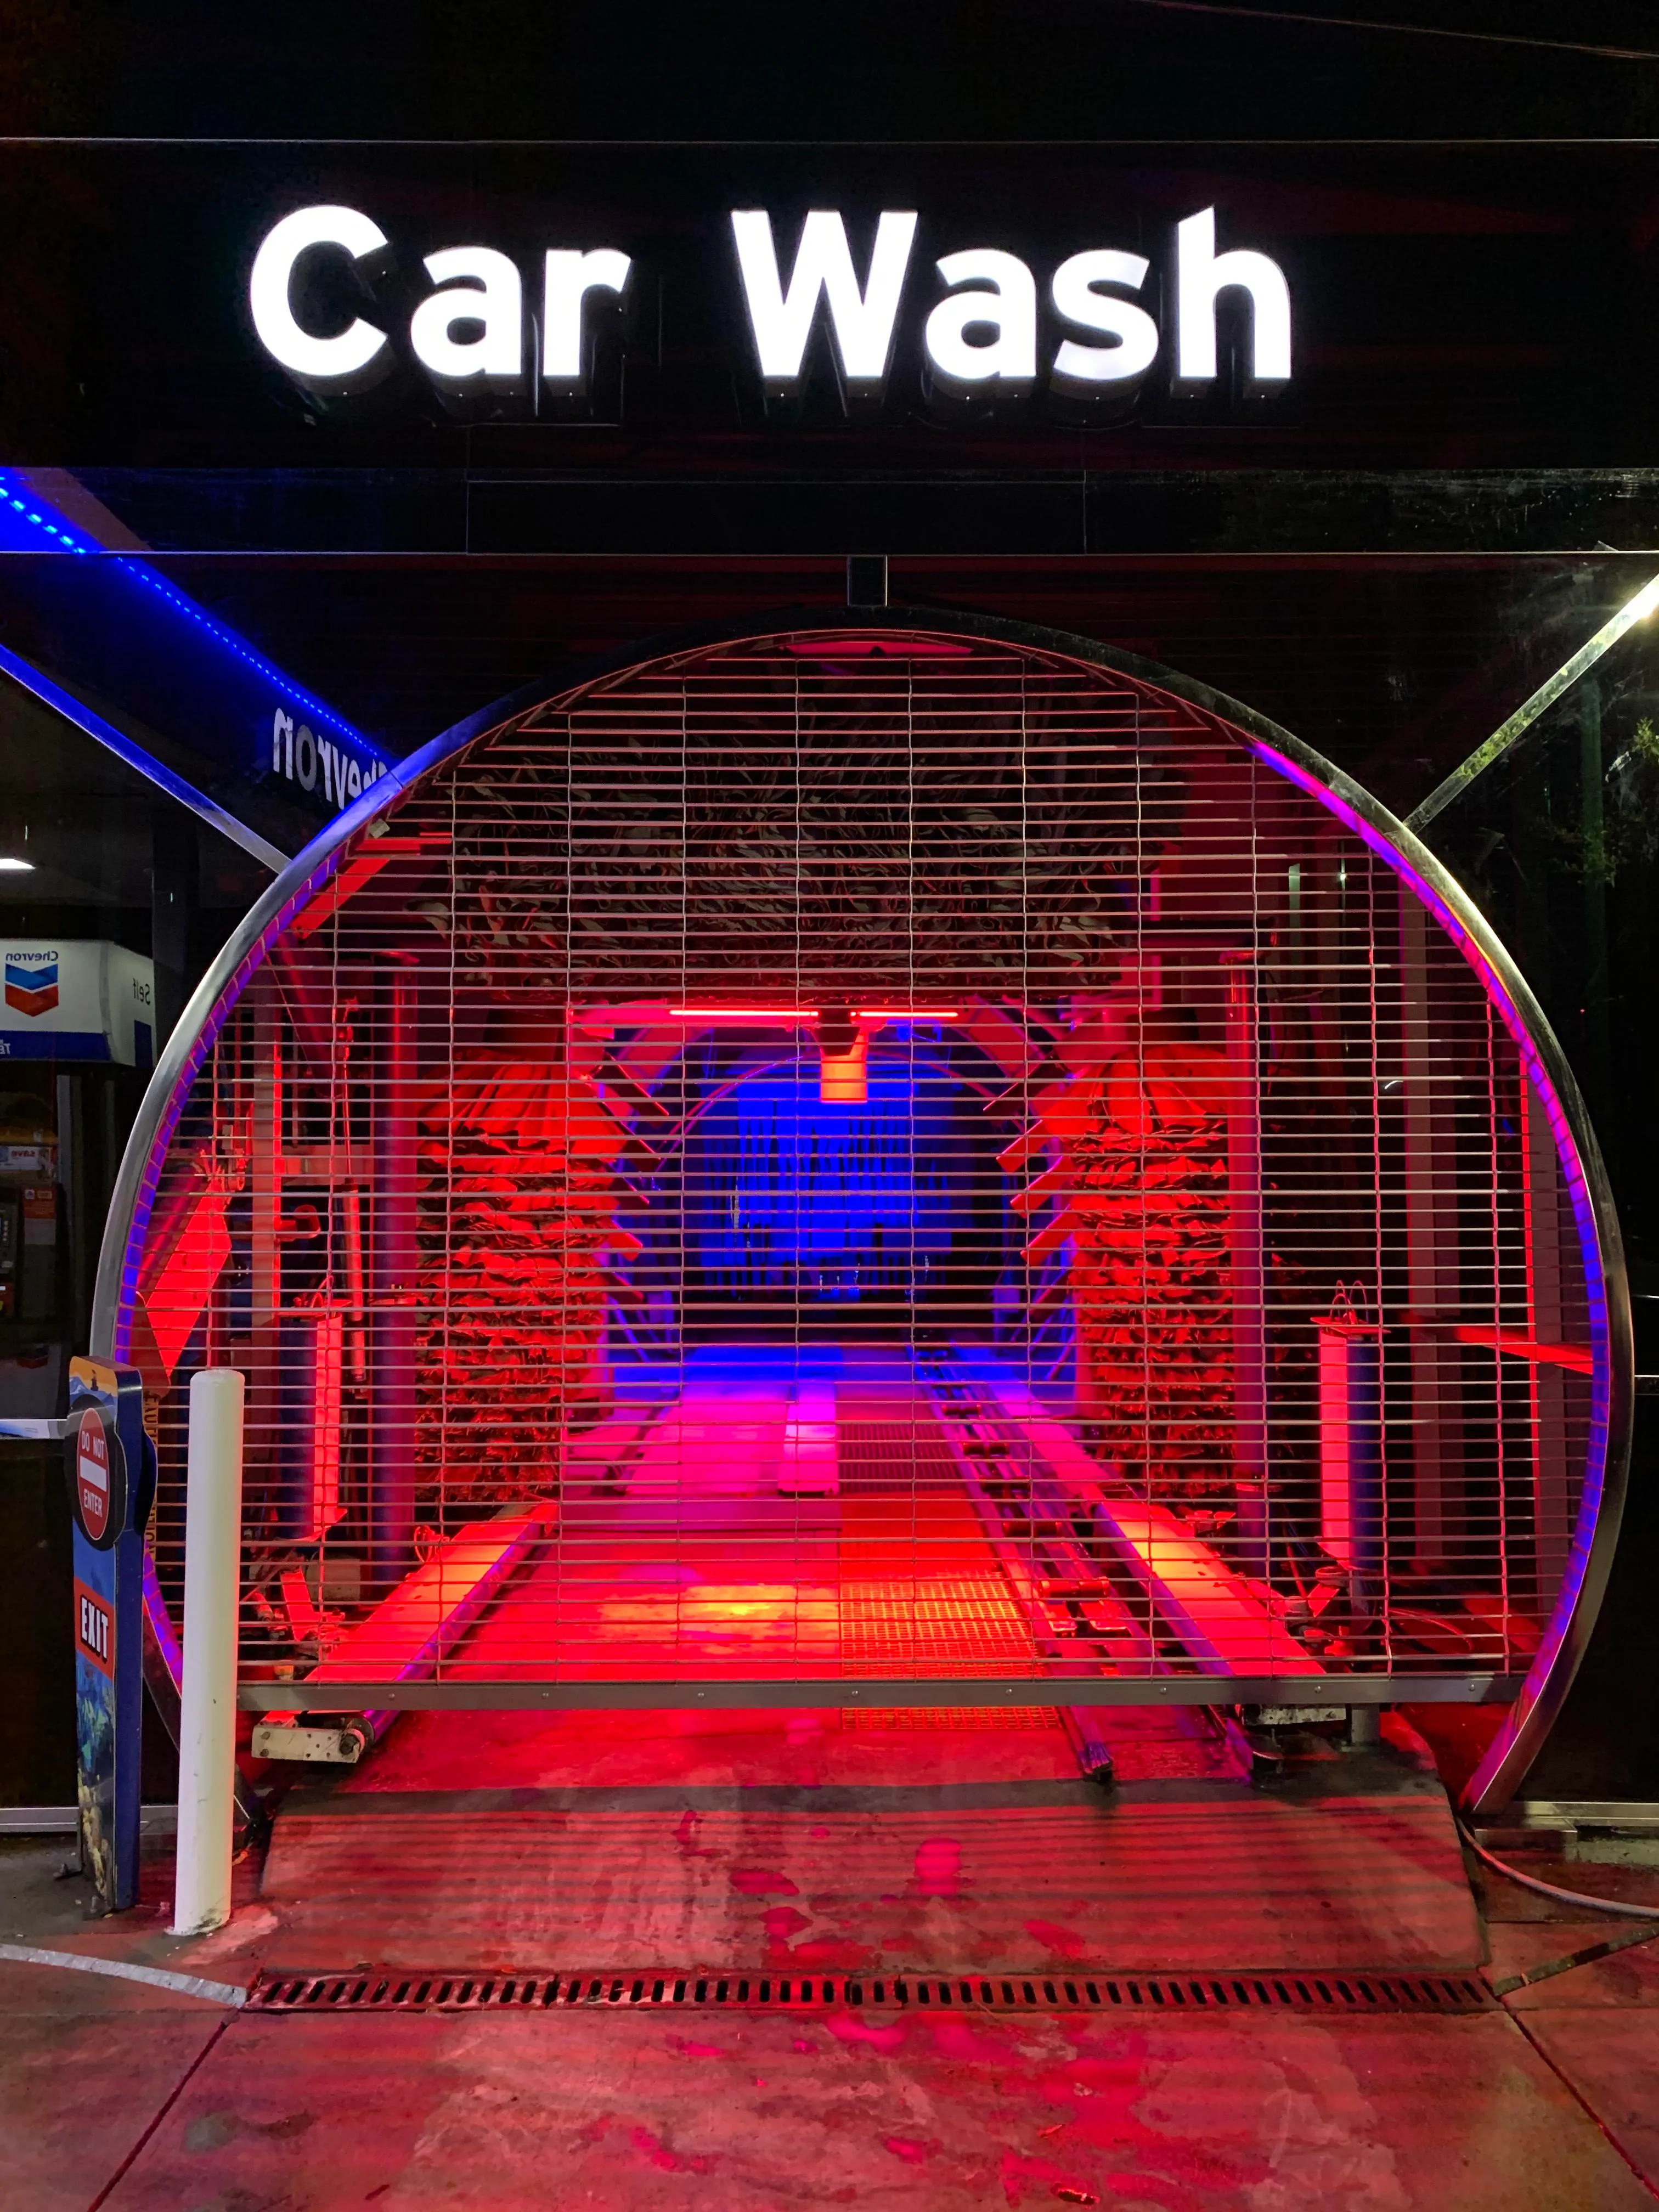 This car wash looks like the entrance to the hottest club in New York.